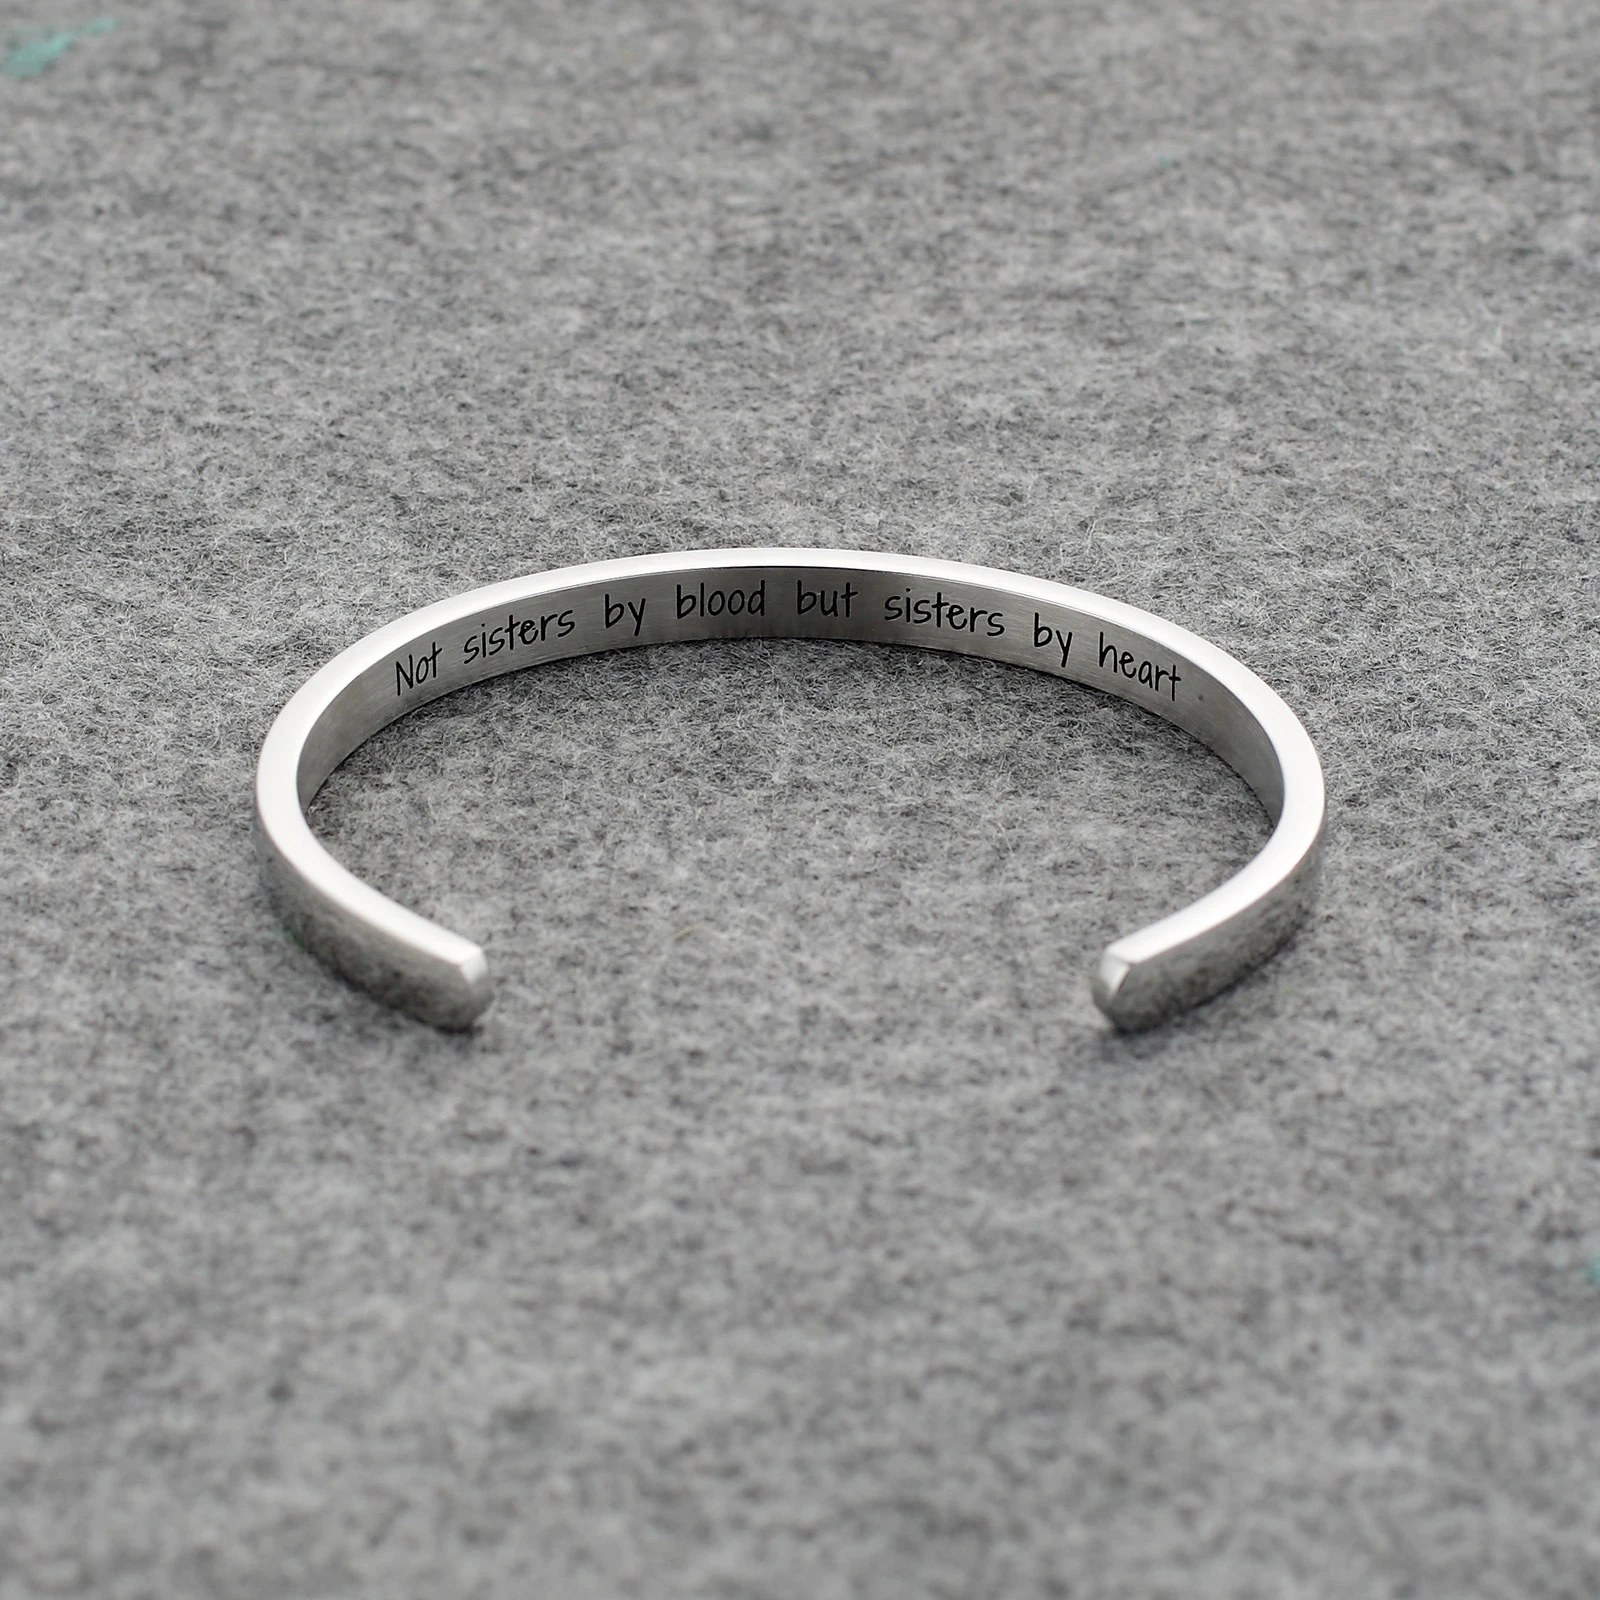 Stainless Steel Jewelry Hand Stamped Engraved Inspirational Mantra Message Bangle 6MM Cuff Bracelet Round